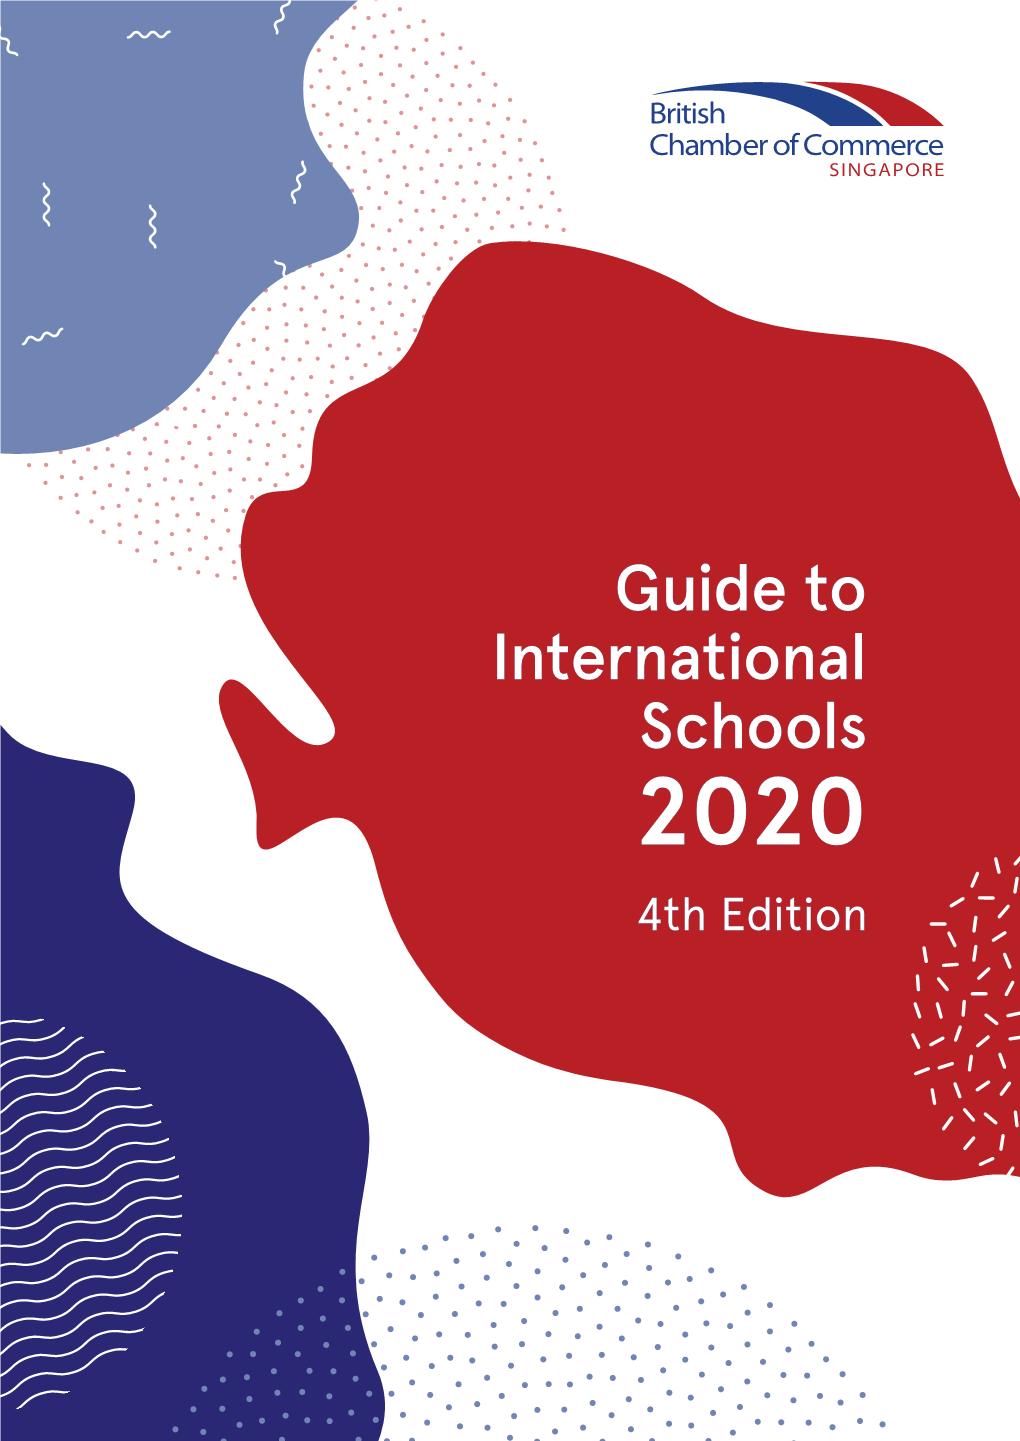 Guide to International Schools Guide to International Schools